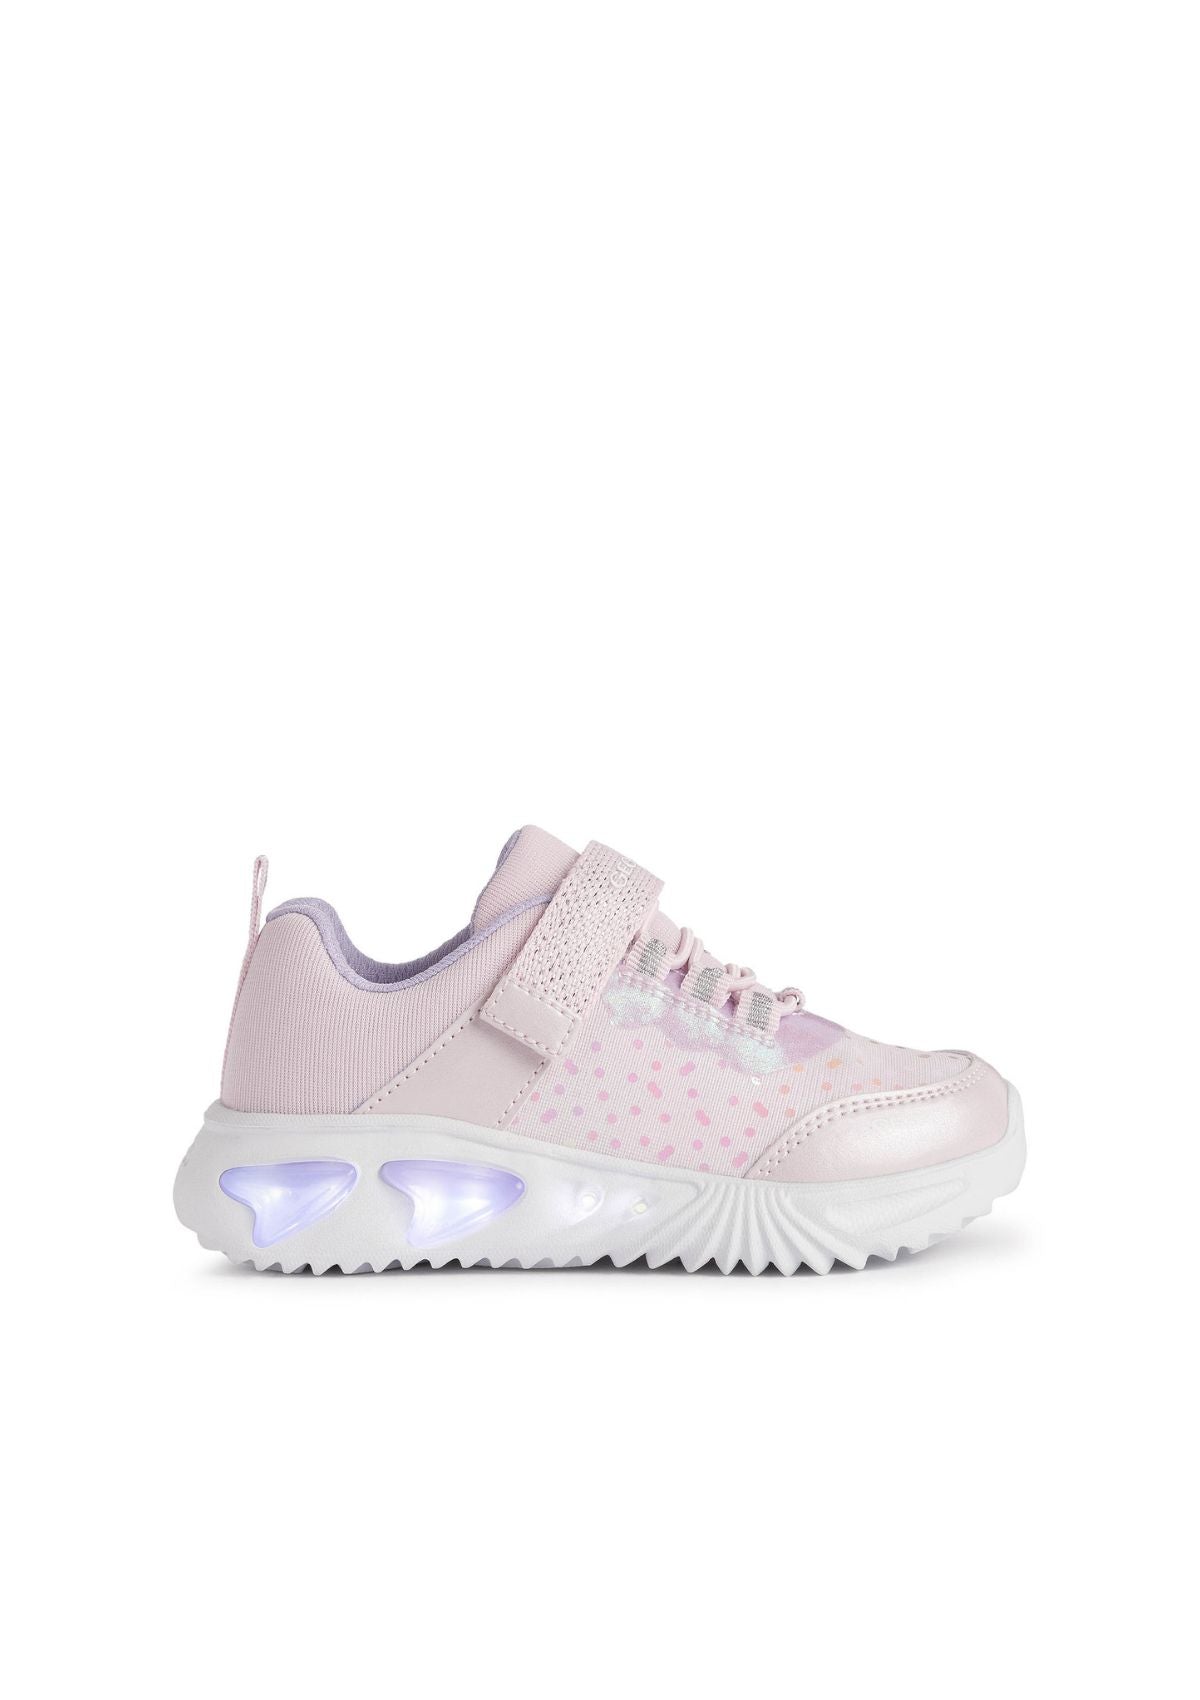 Geox Junior Girls ASSISTER Pink Lilac lights on